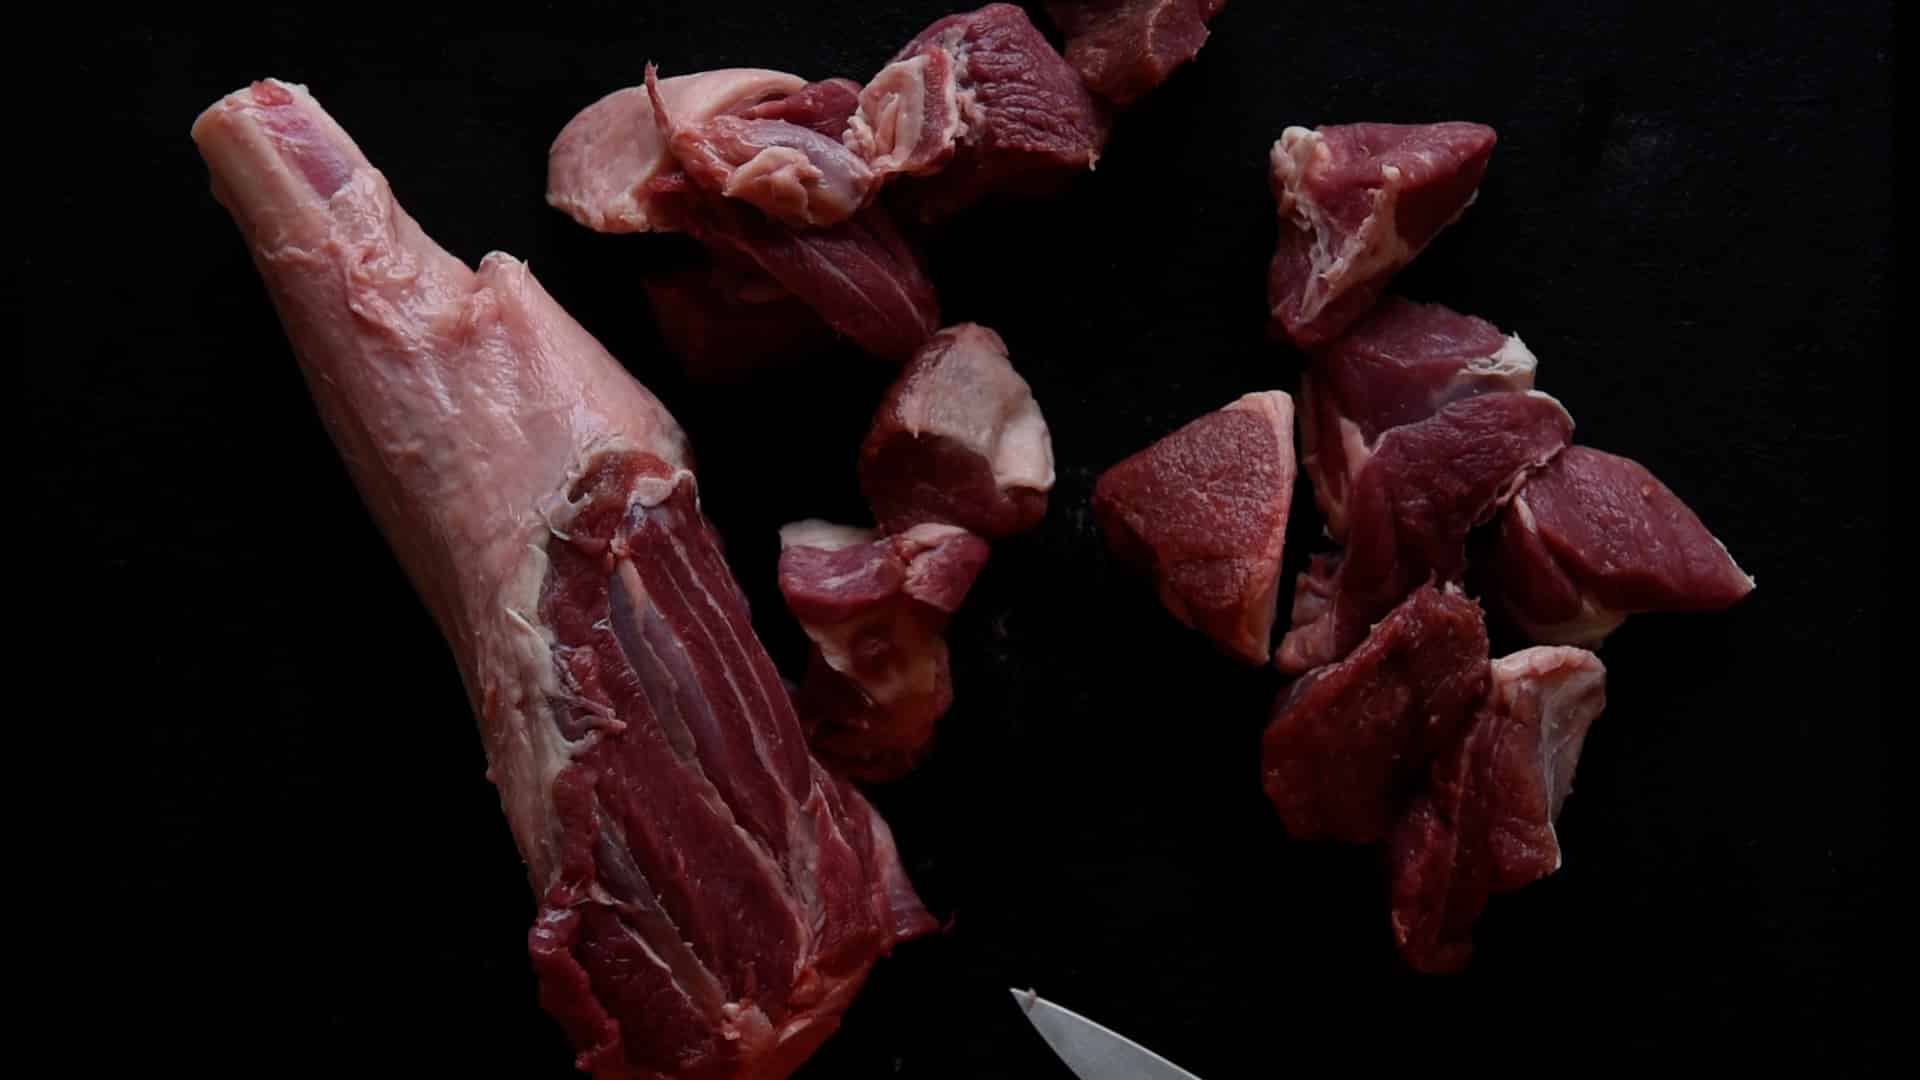 cut the meat of the lamb in small cubes